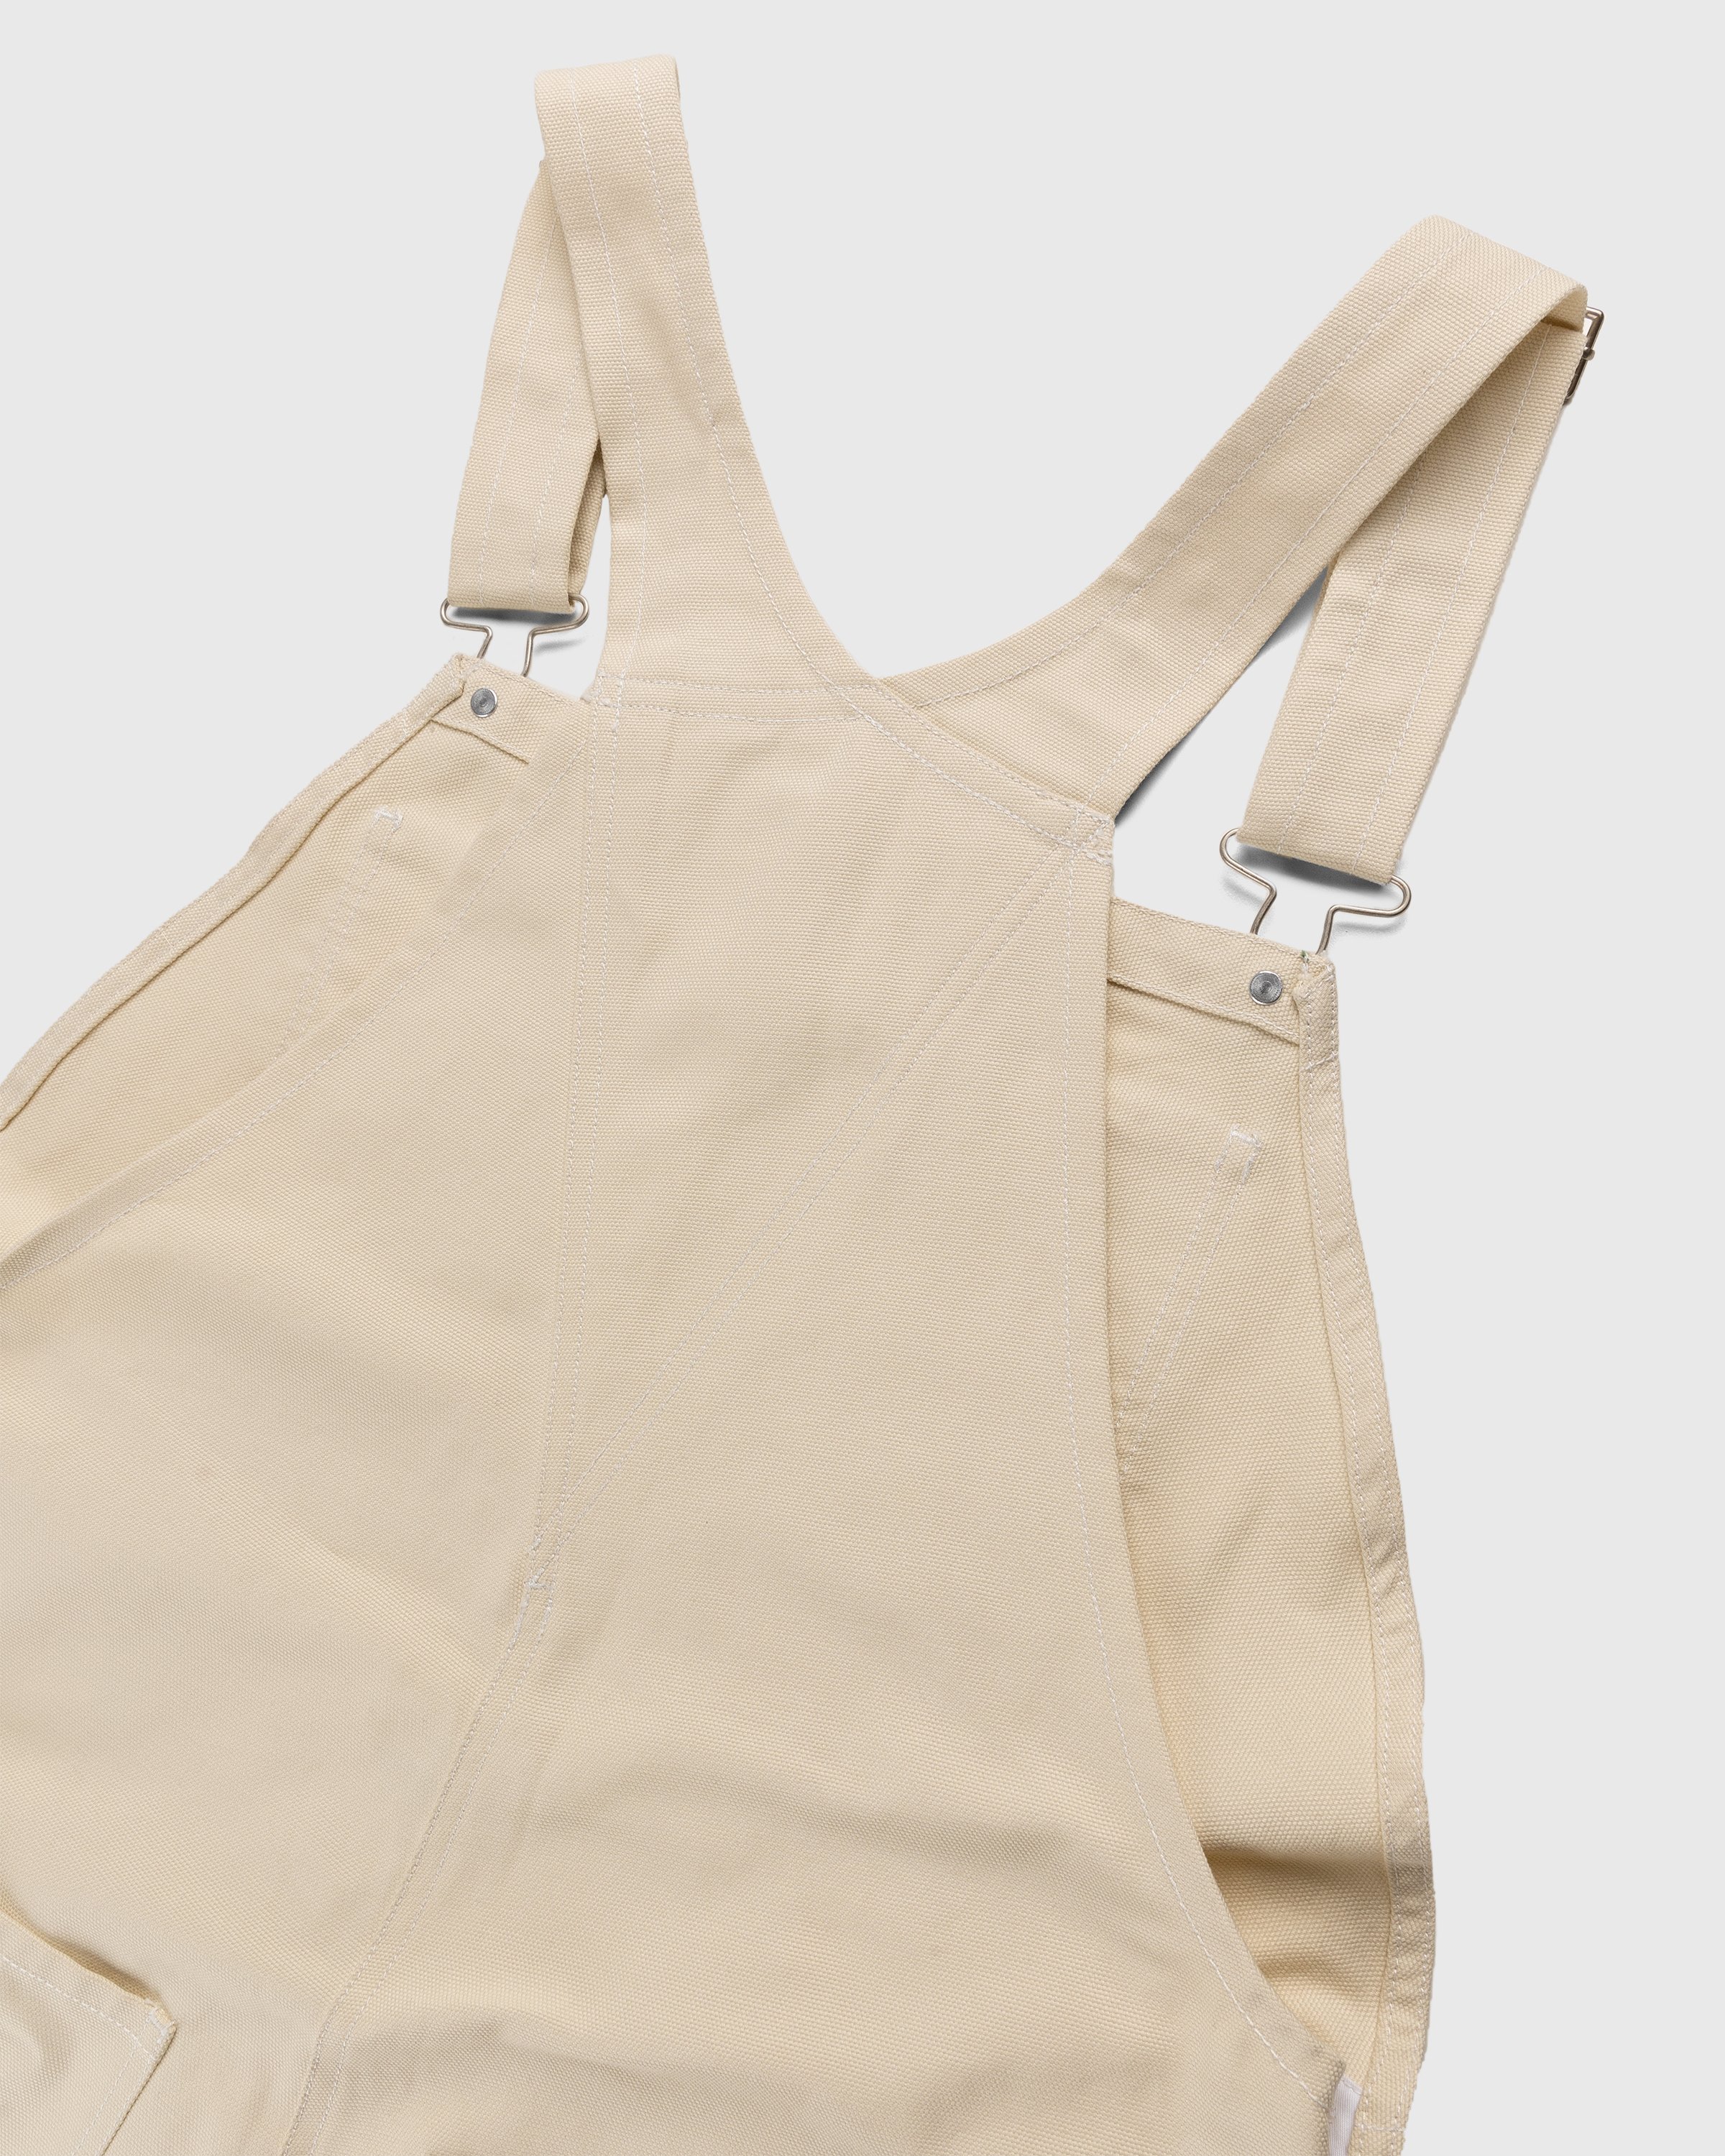 RUF x Highsnobiety - Cotton Overalls Natural - Clothing - Beige - Image 3